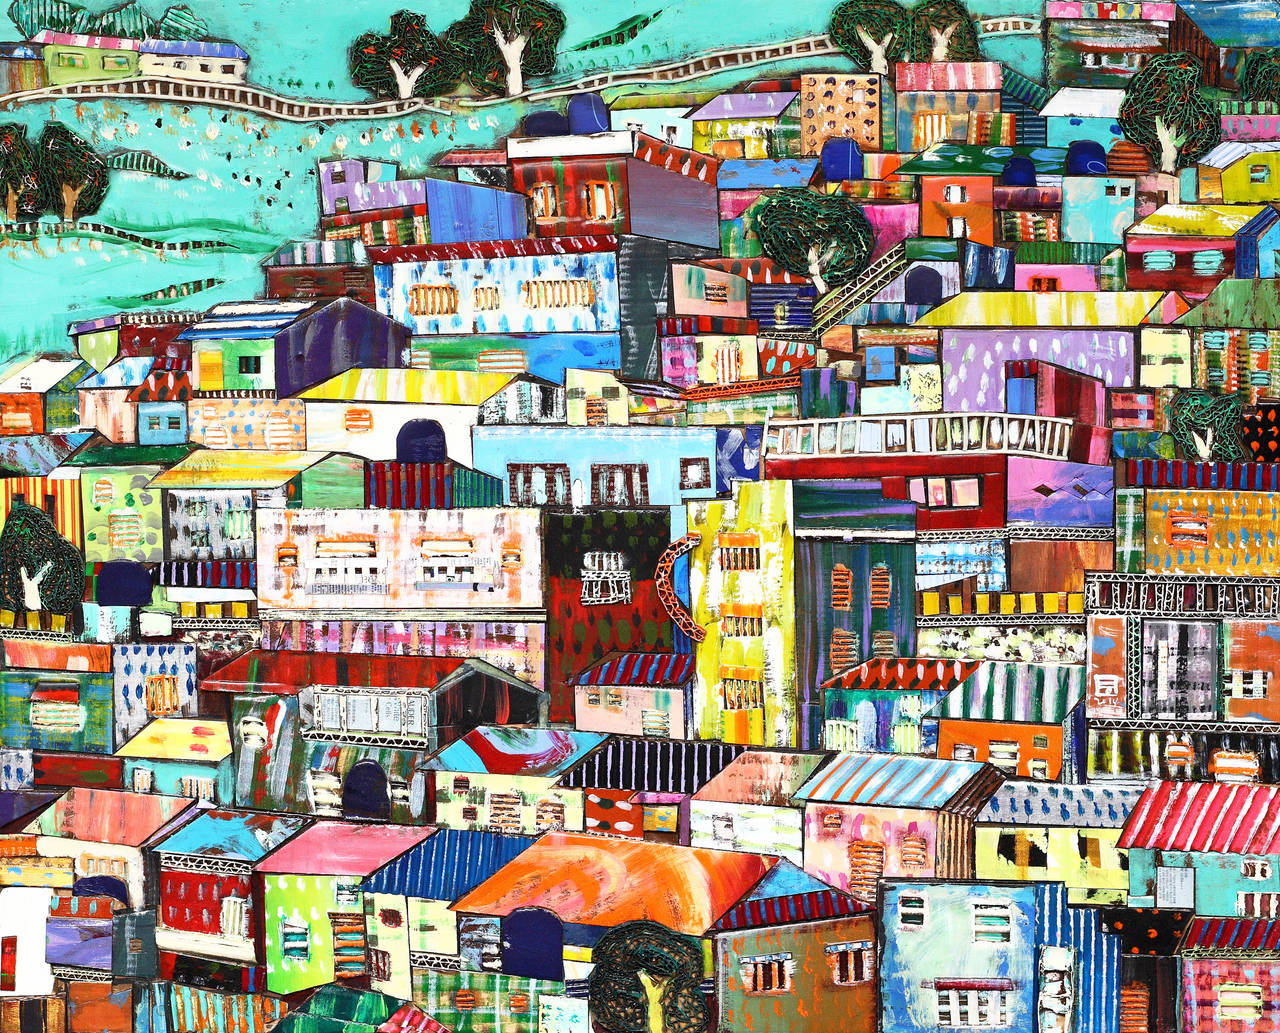 Kyunglim Lee Landscape Painting - Coexistence, town with multicolored apartments and buildings, mixed media